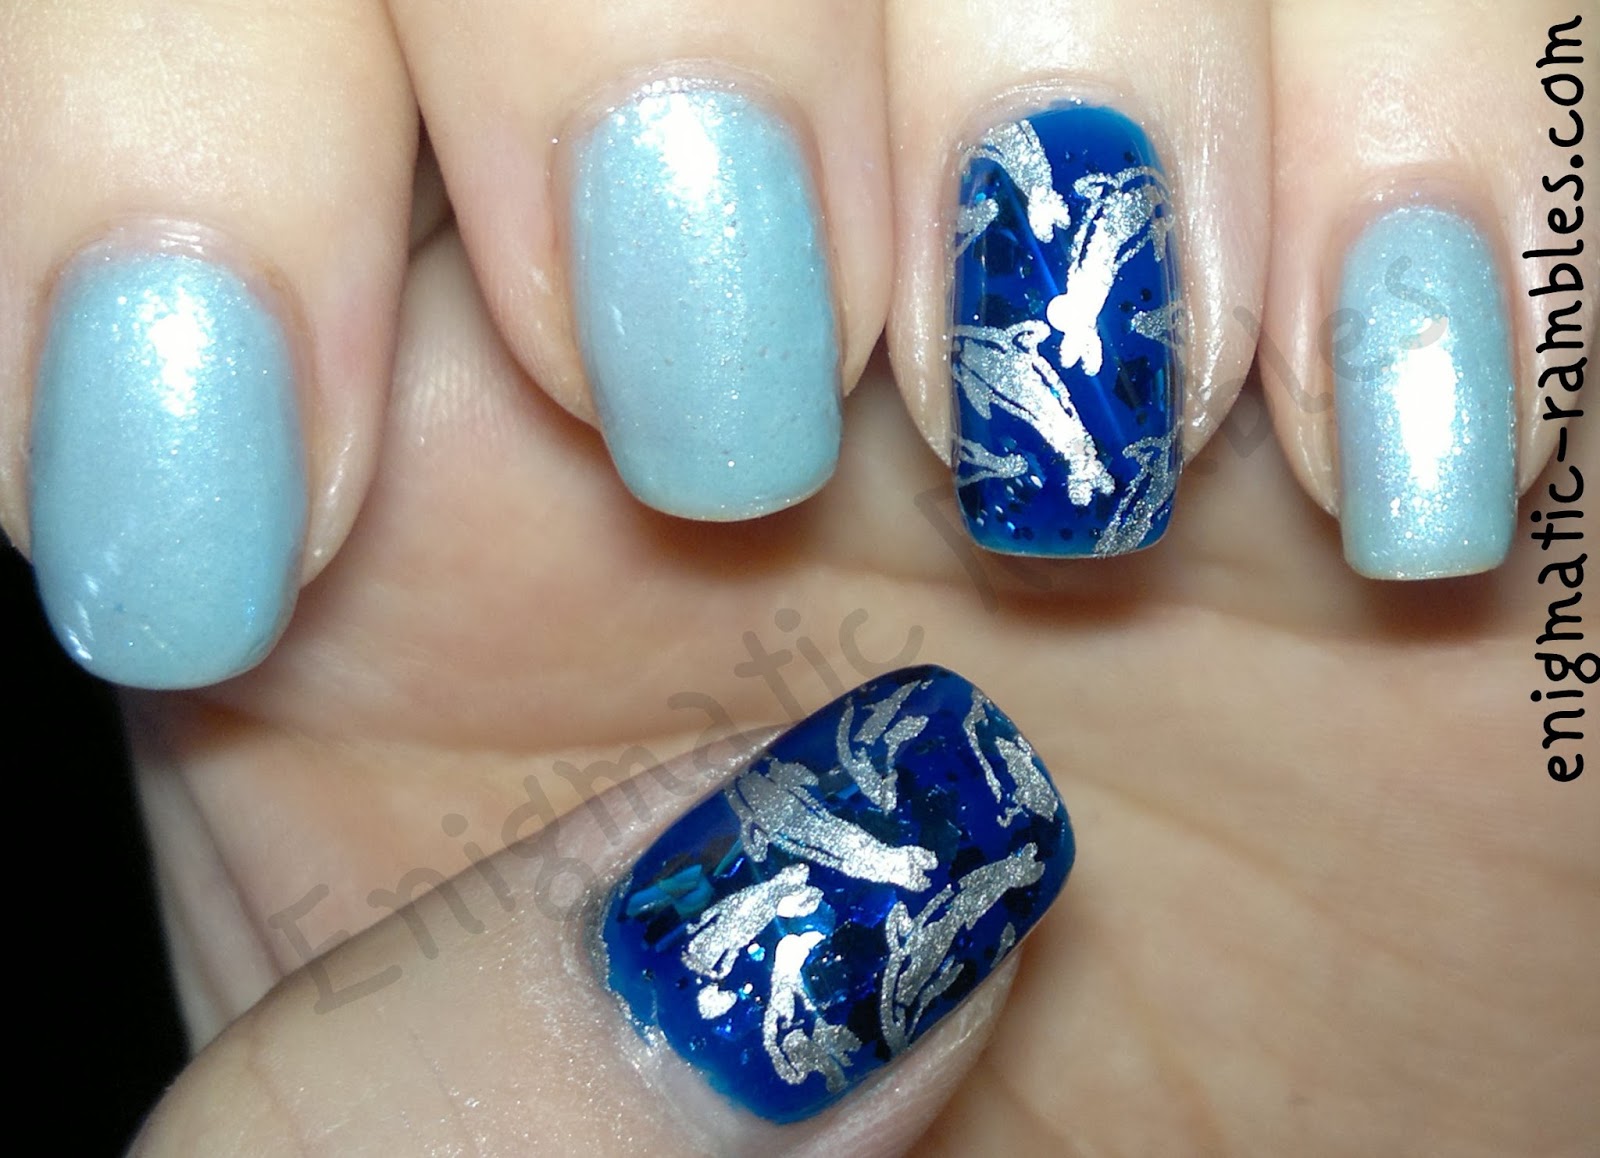 under-the-sea-dolphin-stamped-nails-nail-art-la-femme-viva-la-venus-kleancolor-blue-eyed-girl-stargazer-silver-chrome-cheeky-stamping-plates-ch38